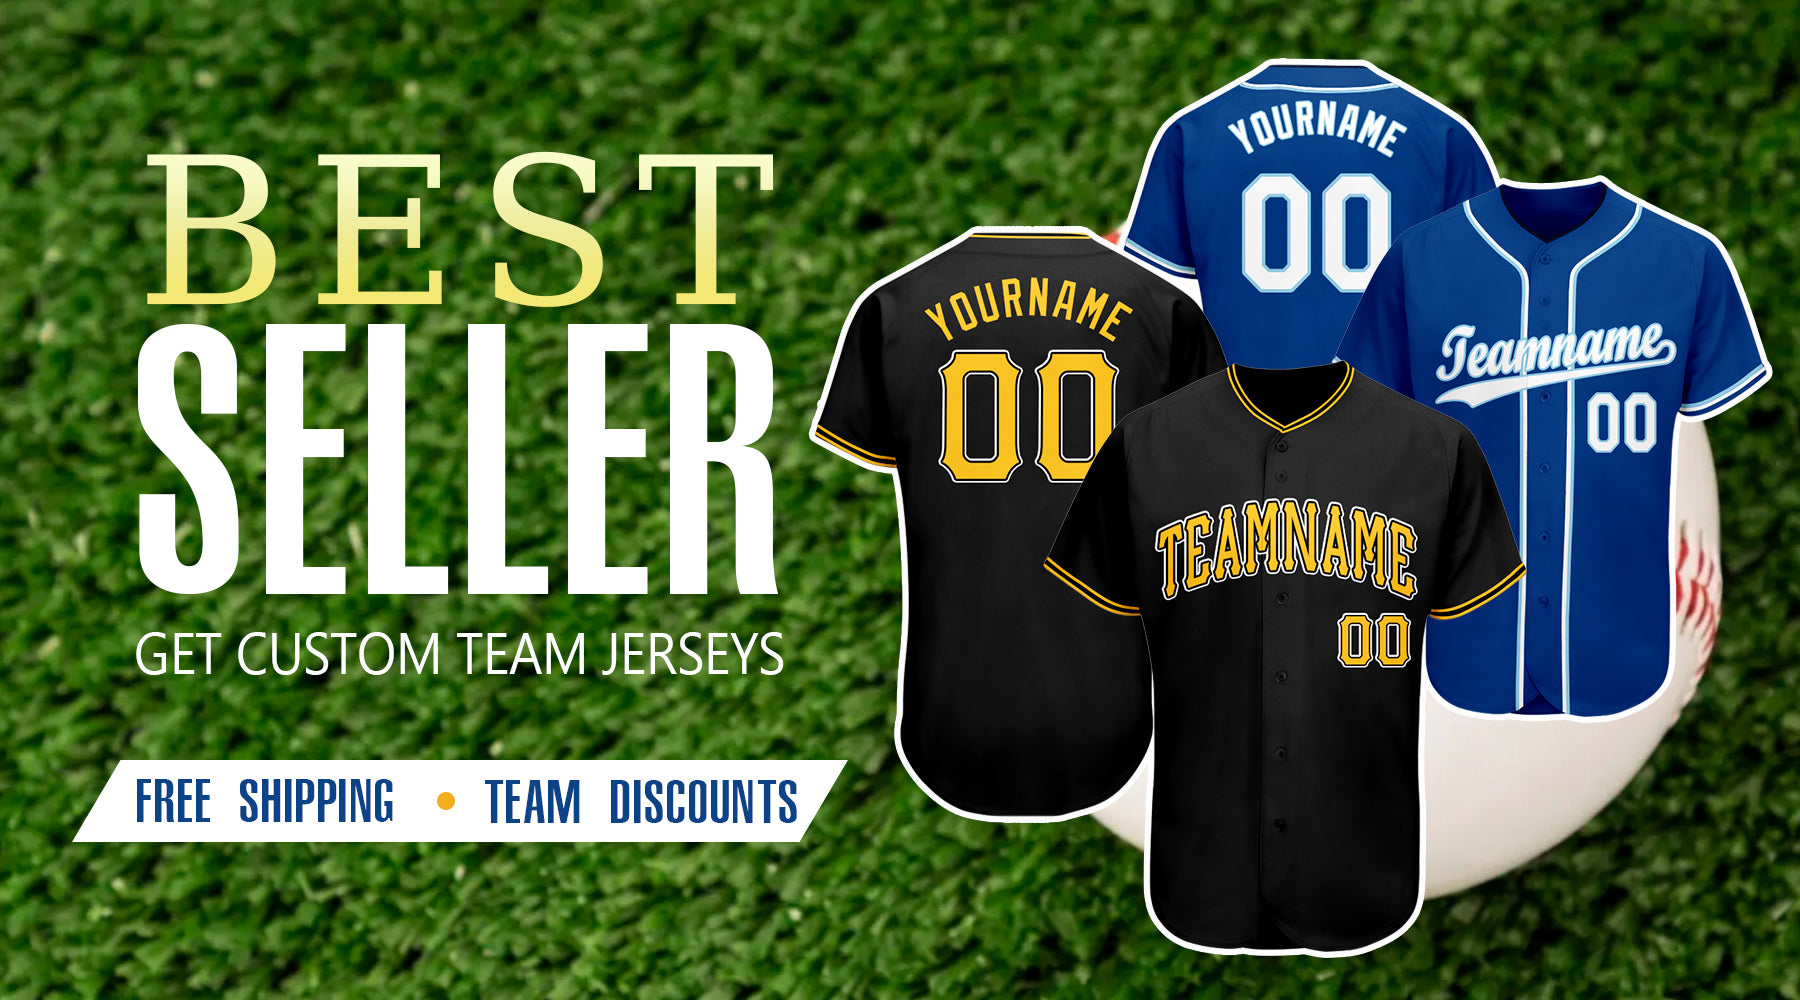 Custom Baseball Jerseys - Cheap Create Your Own Team Stitched